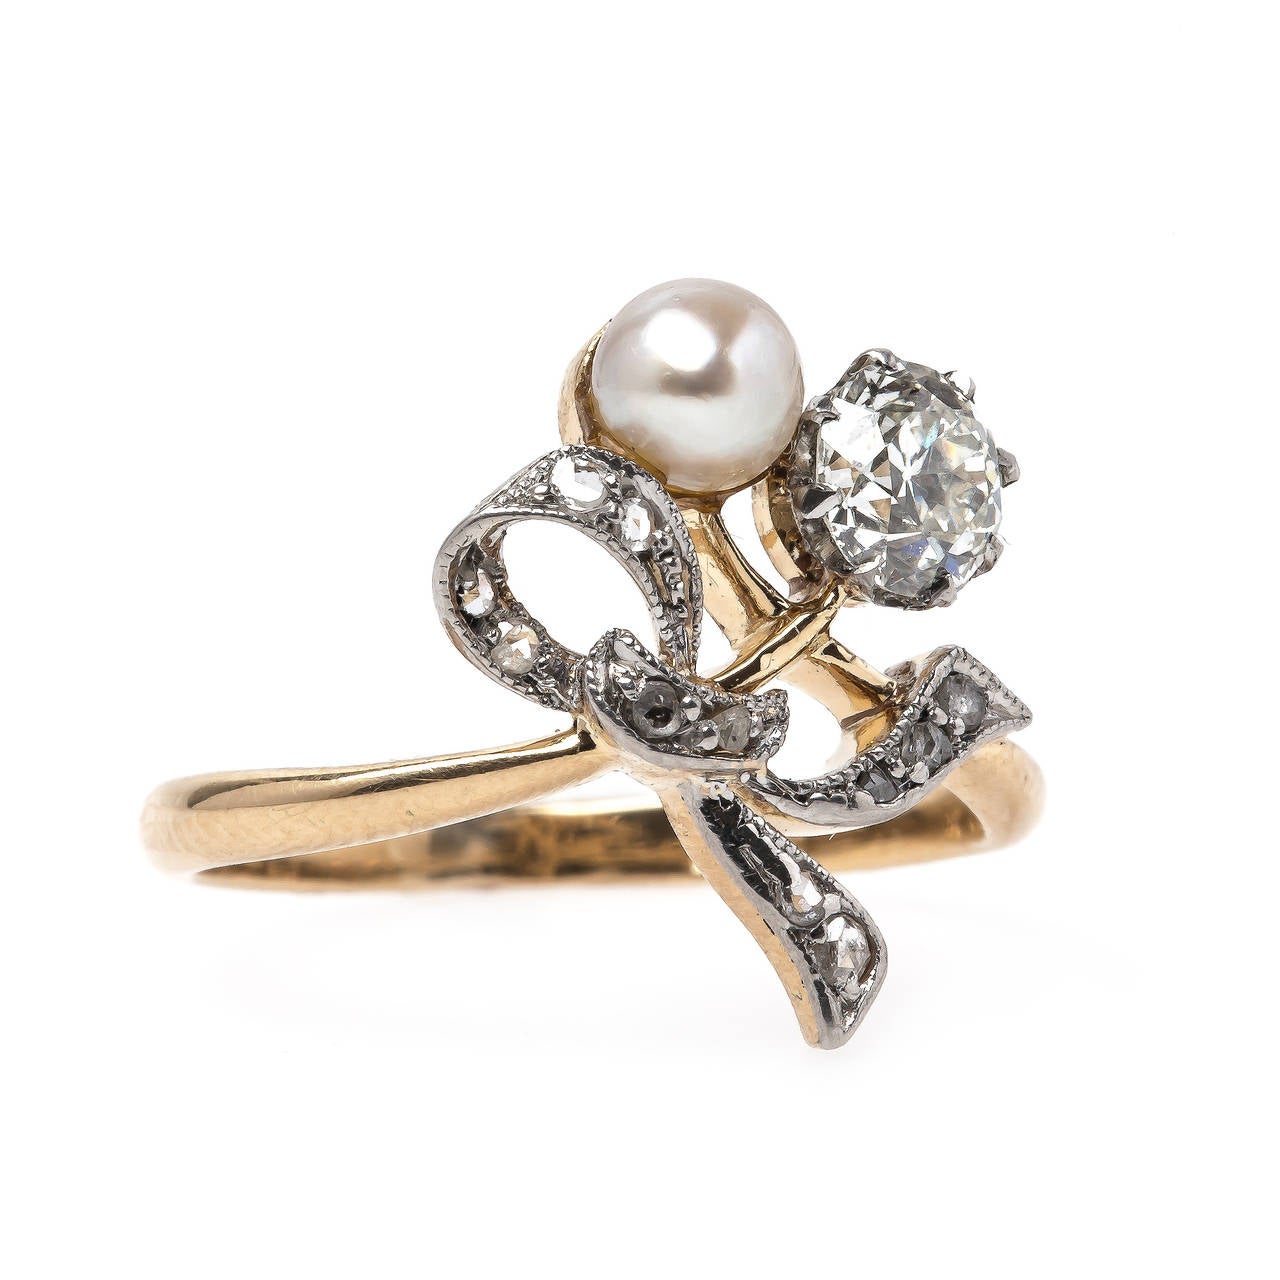 Chancery Lane is a romantic authentic Edwardian era (circa 1910) platinum topped 18k yellow gold ring featuring a classic diamond and pearl combination. It features a 0.41ct EGL certified Old European Cut diamond graded I color and VS2 clarity